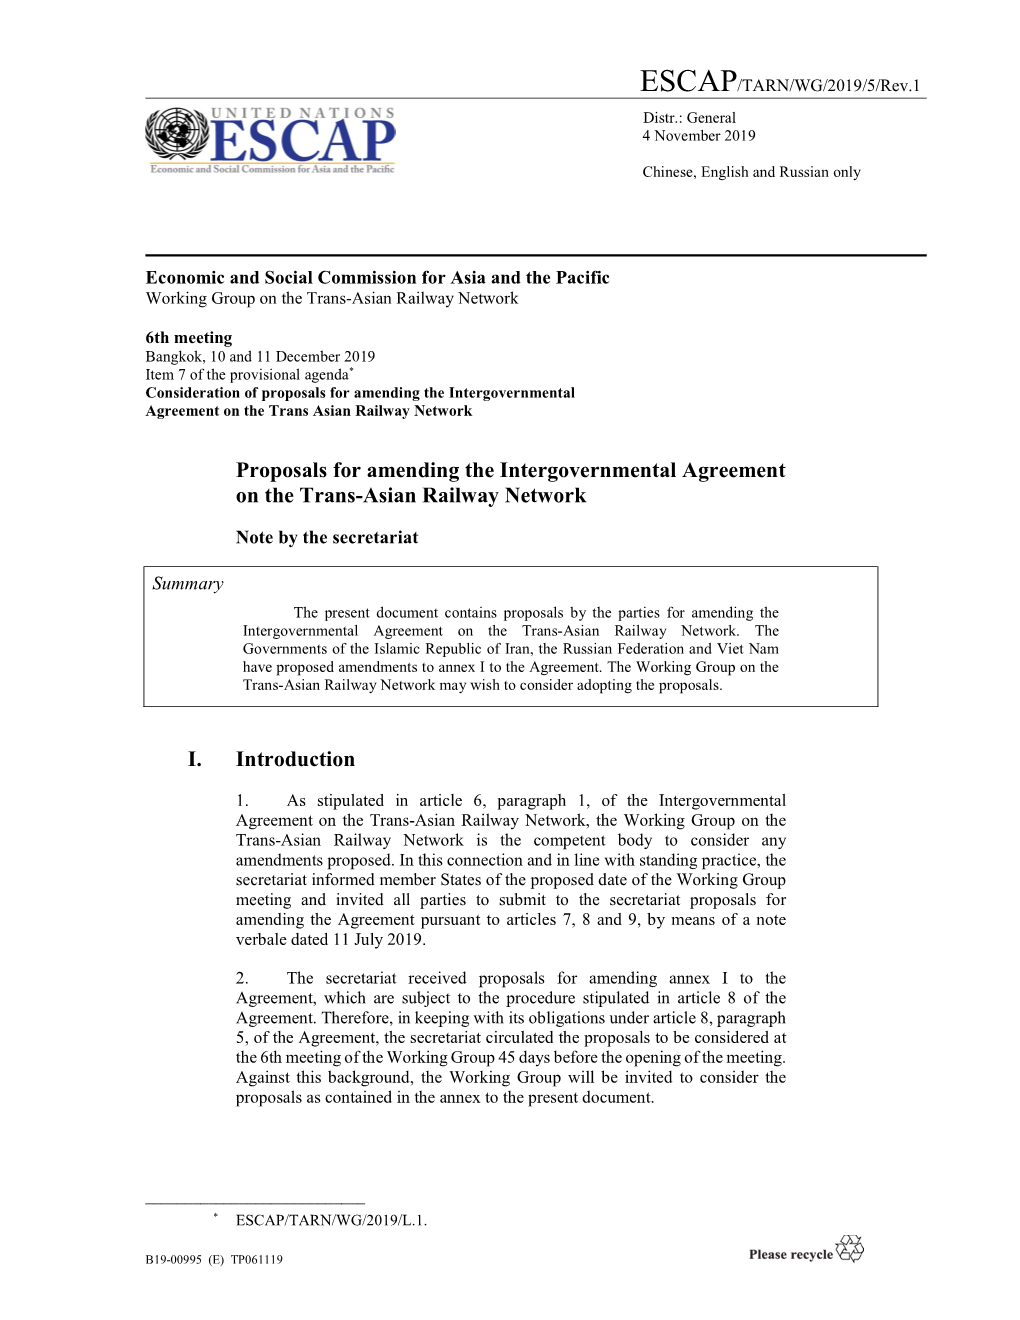 Proposals for Amending the Intergovernmental Agreement on the Trans Asian Railway Network